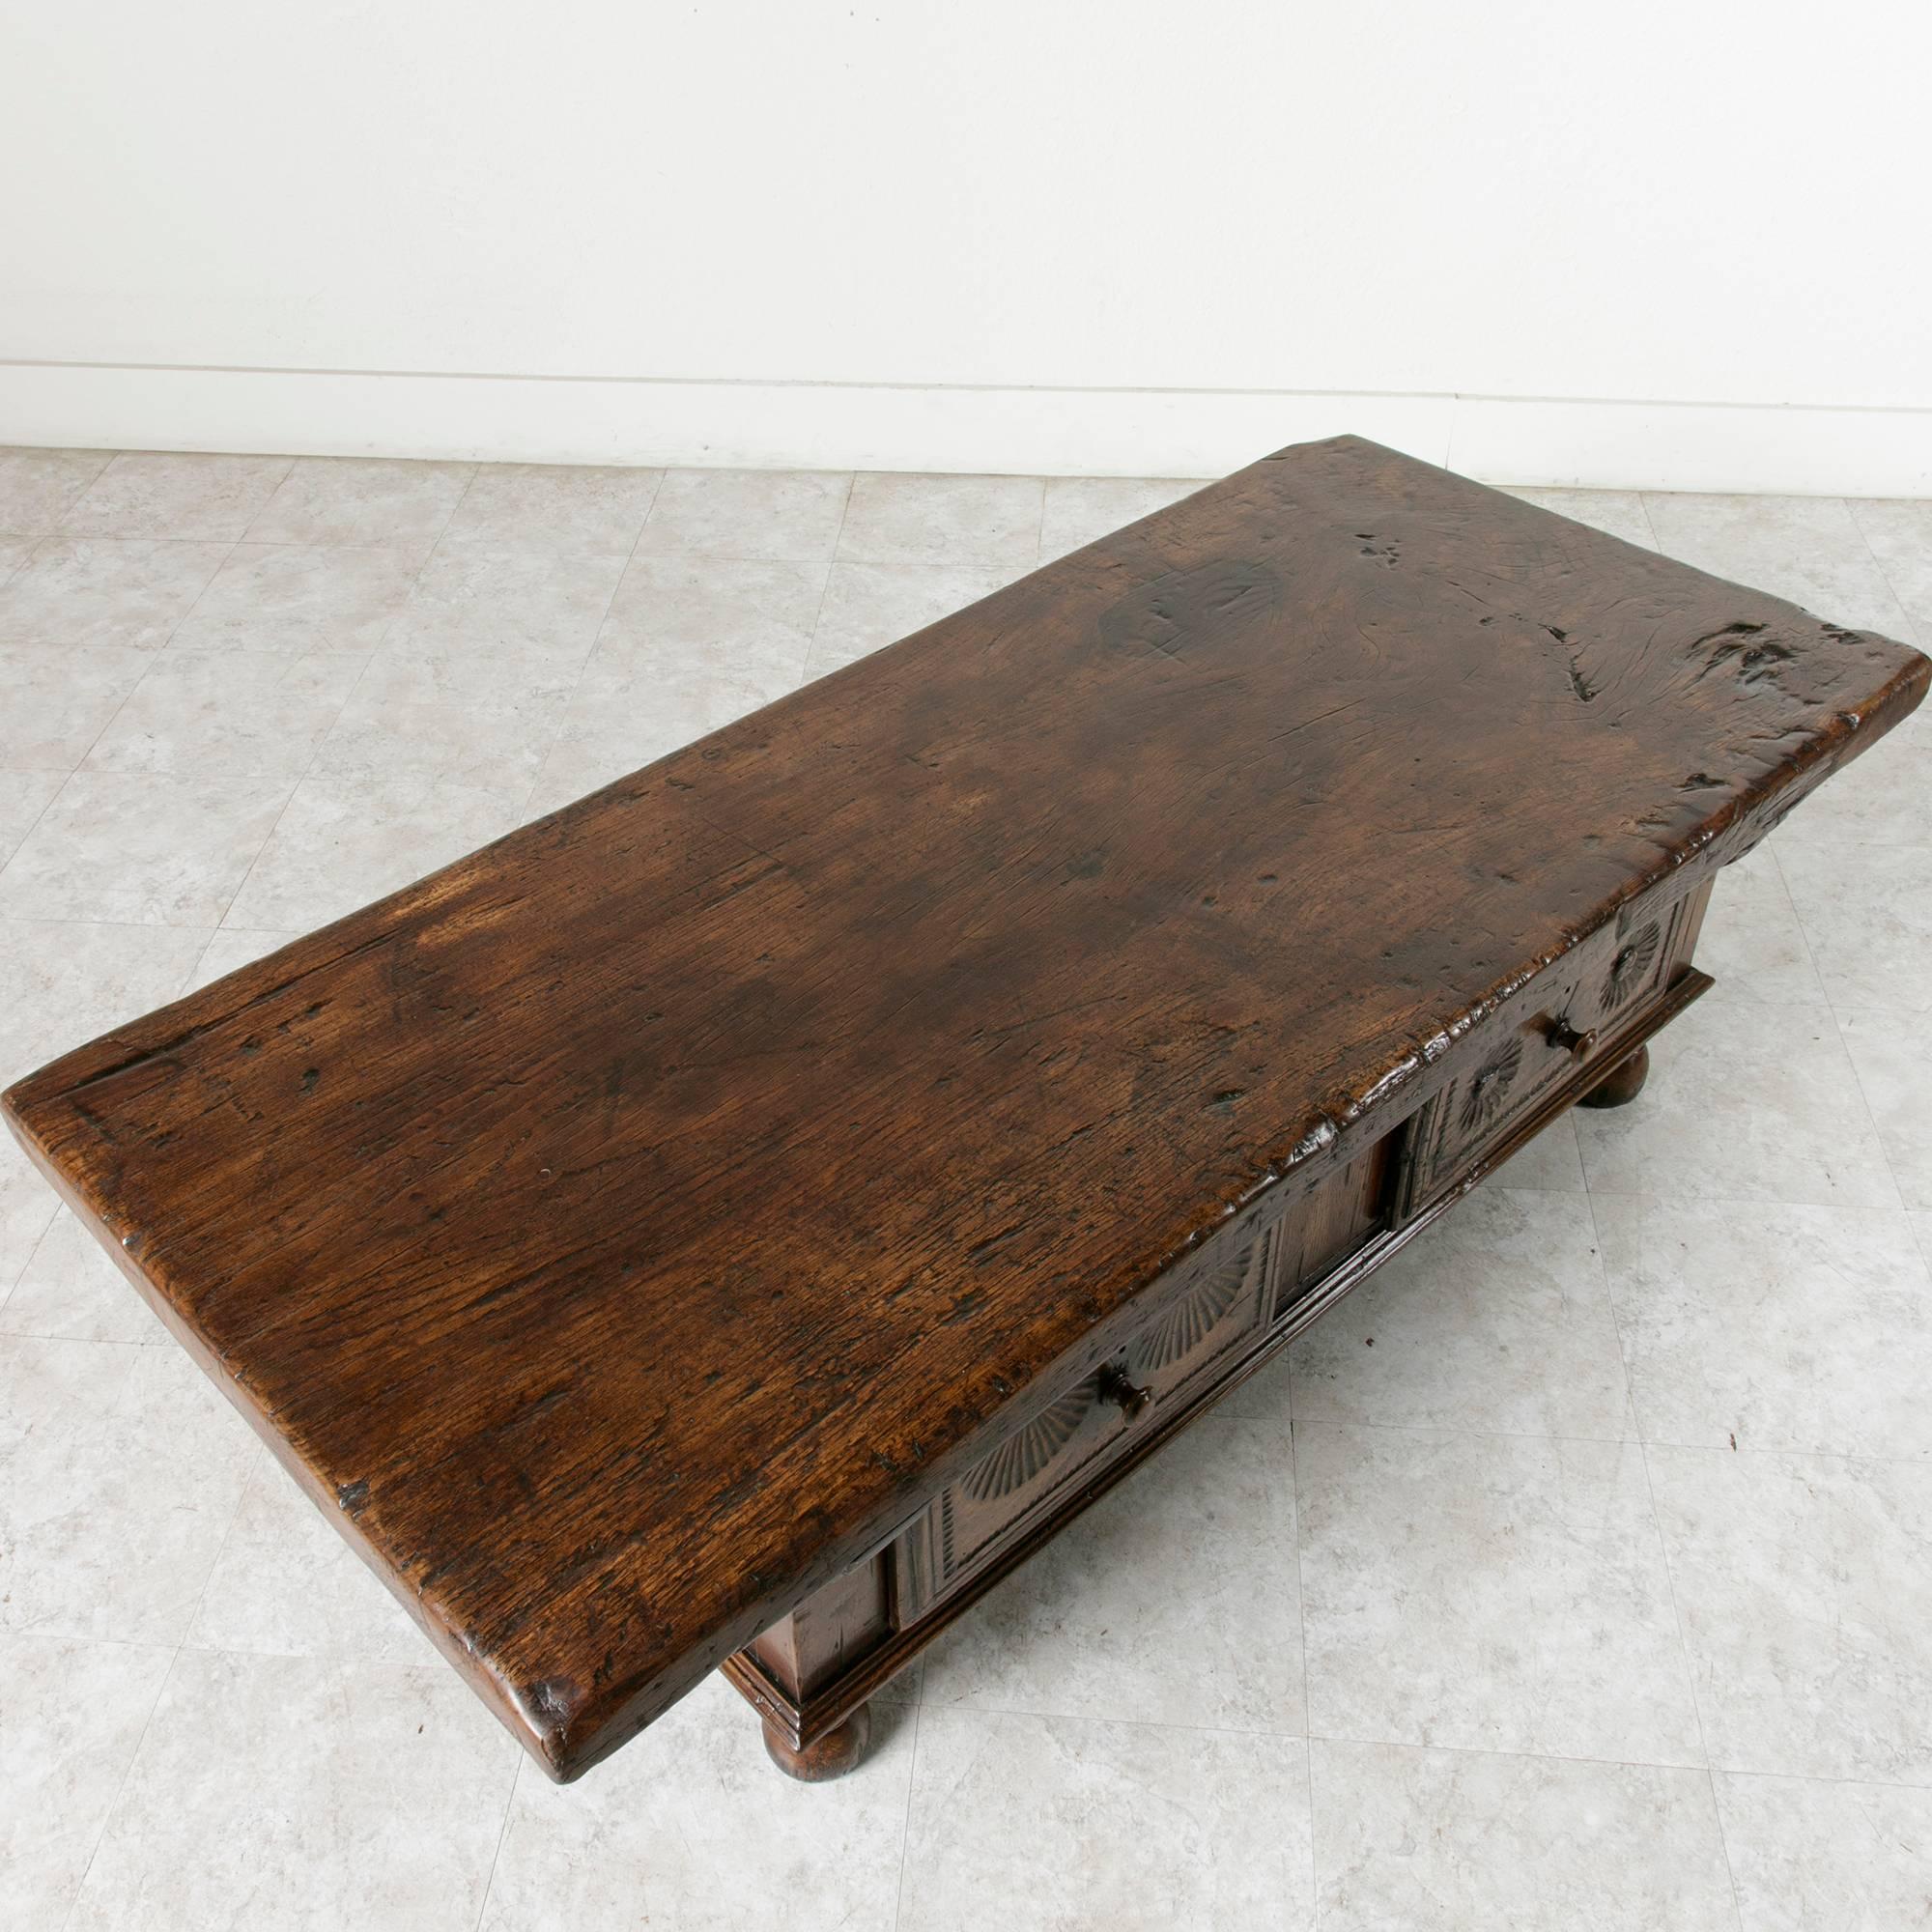 Recently found in a chateau in Normandy, France, near the city of Evreux, this eighteenth century coffee table boasts a solid 2.5 inch thick top made of a single piece of walnut. Two drawers of dovetail construction feature hand-carved fronts, each